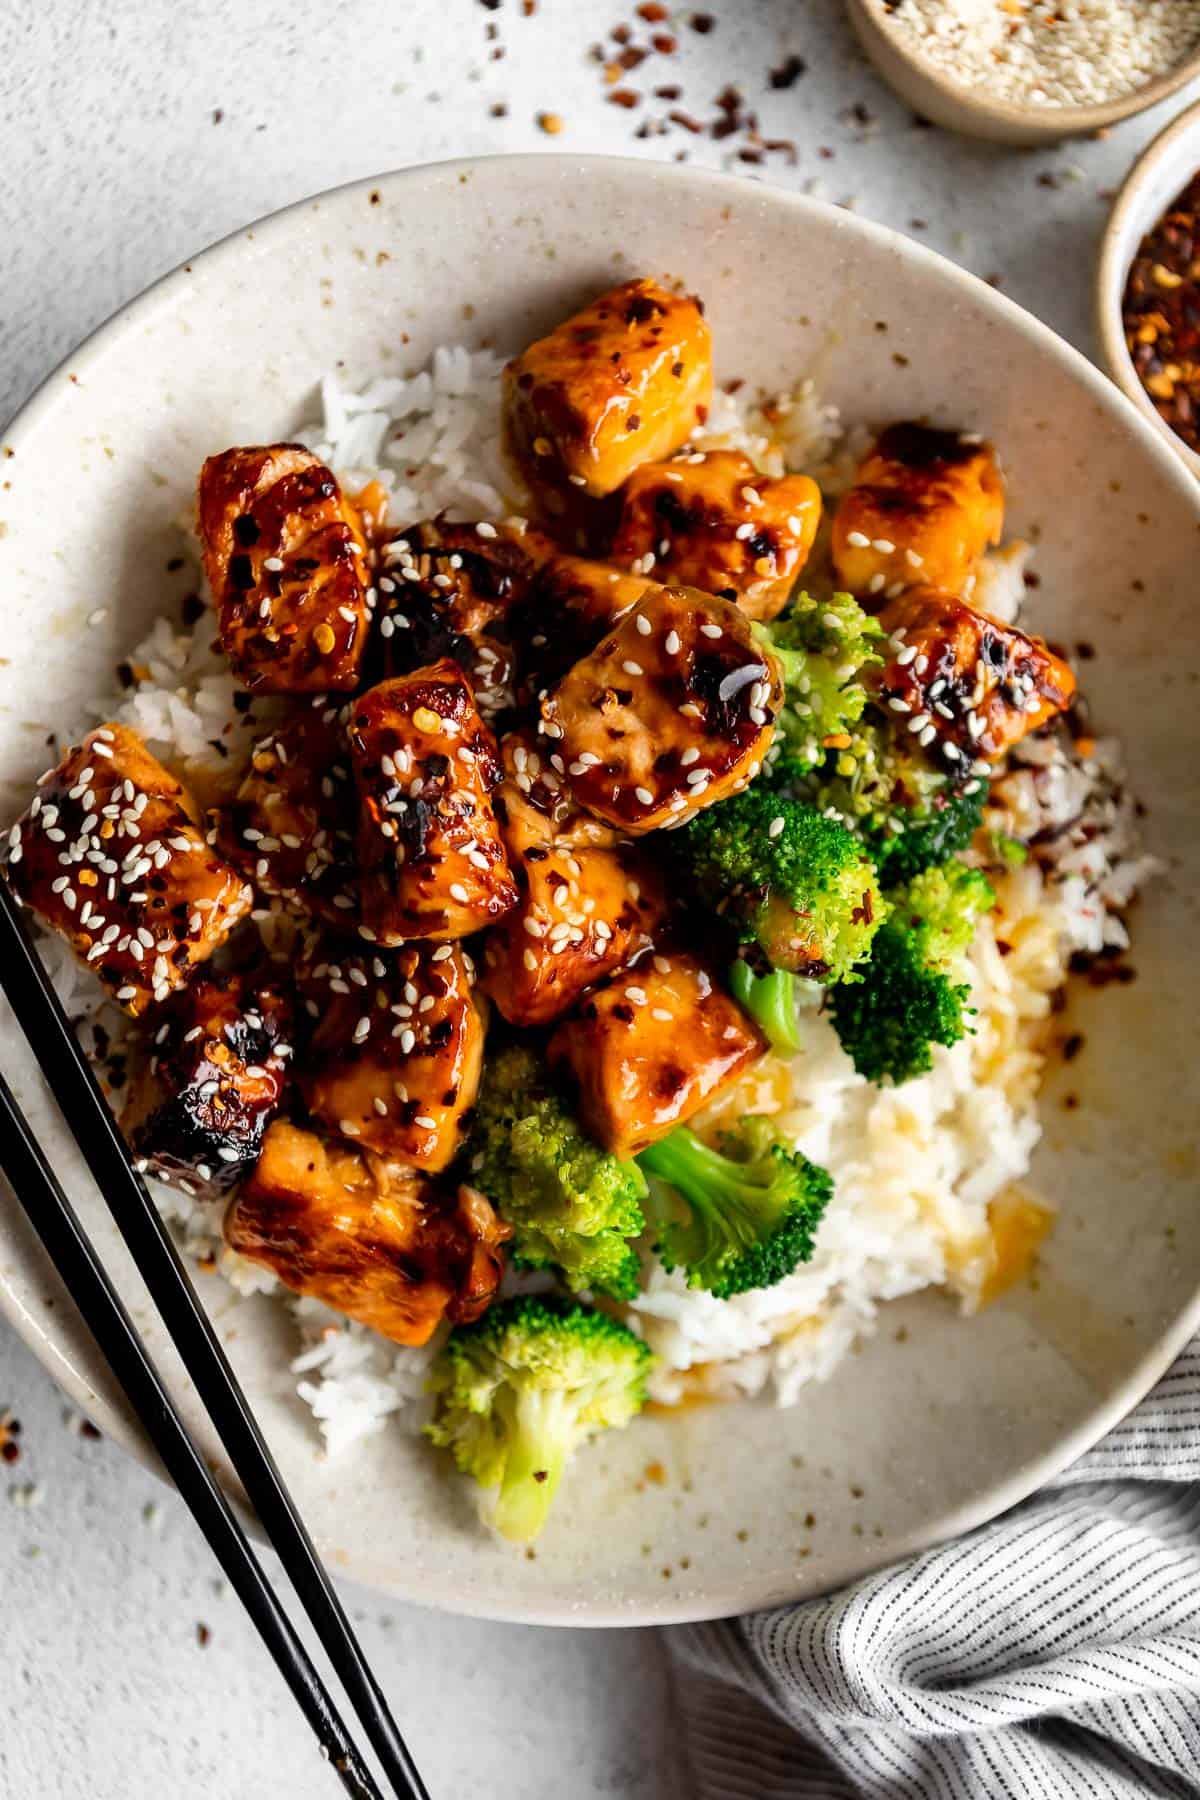 orange salmon bowls with broccoli and white rice